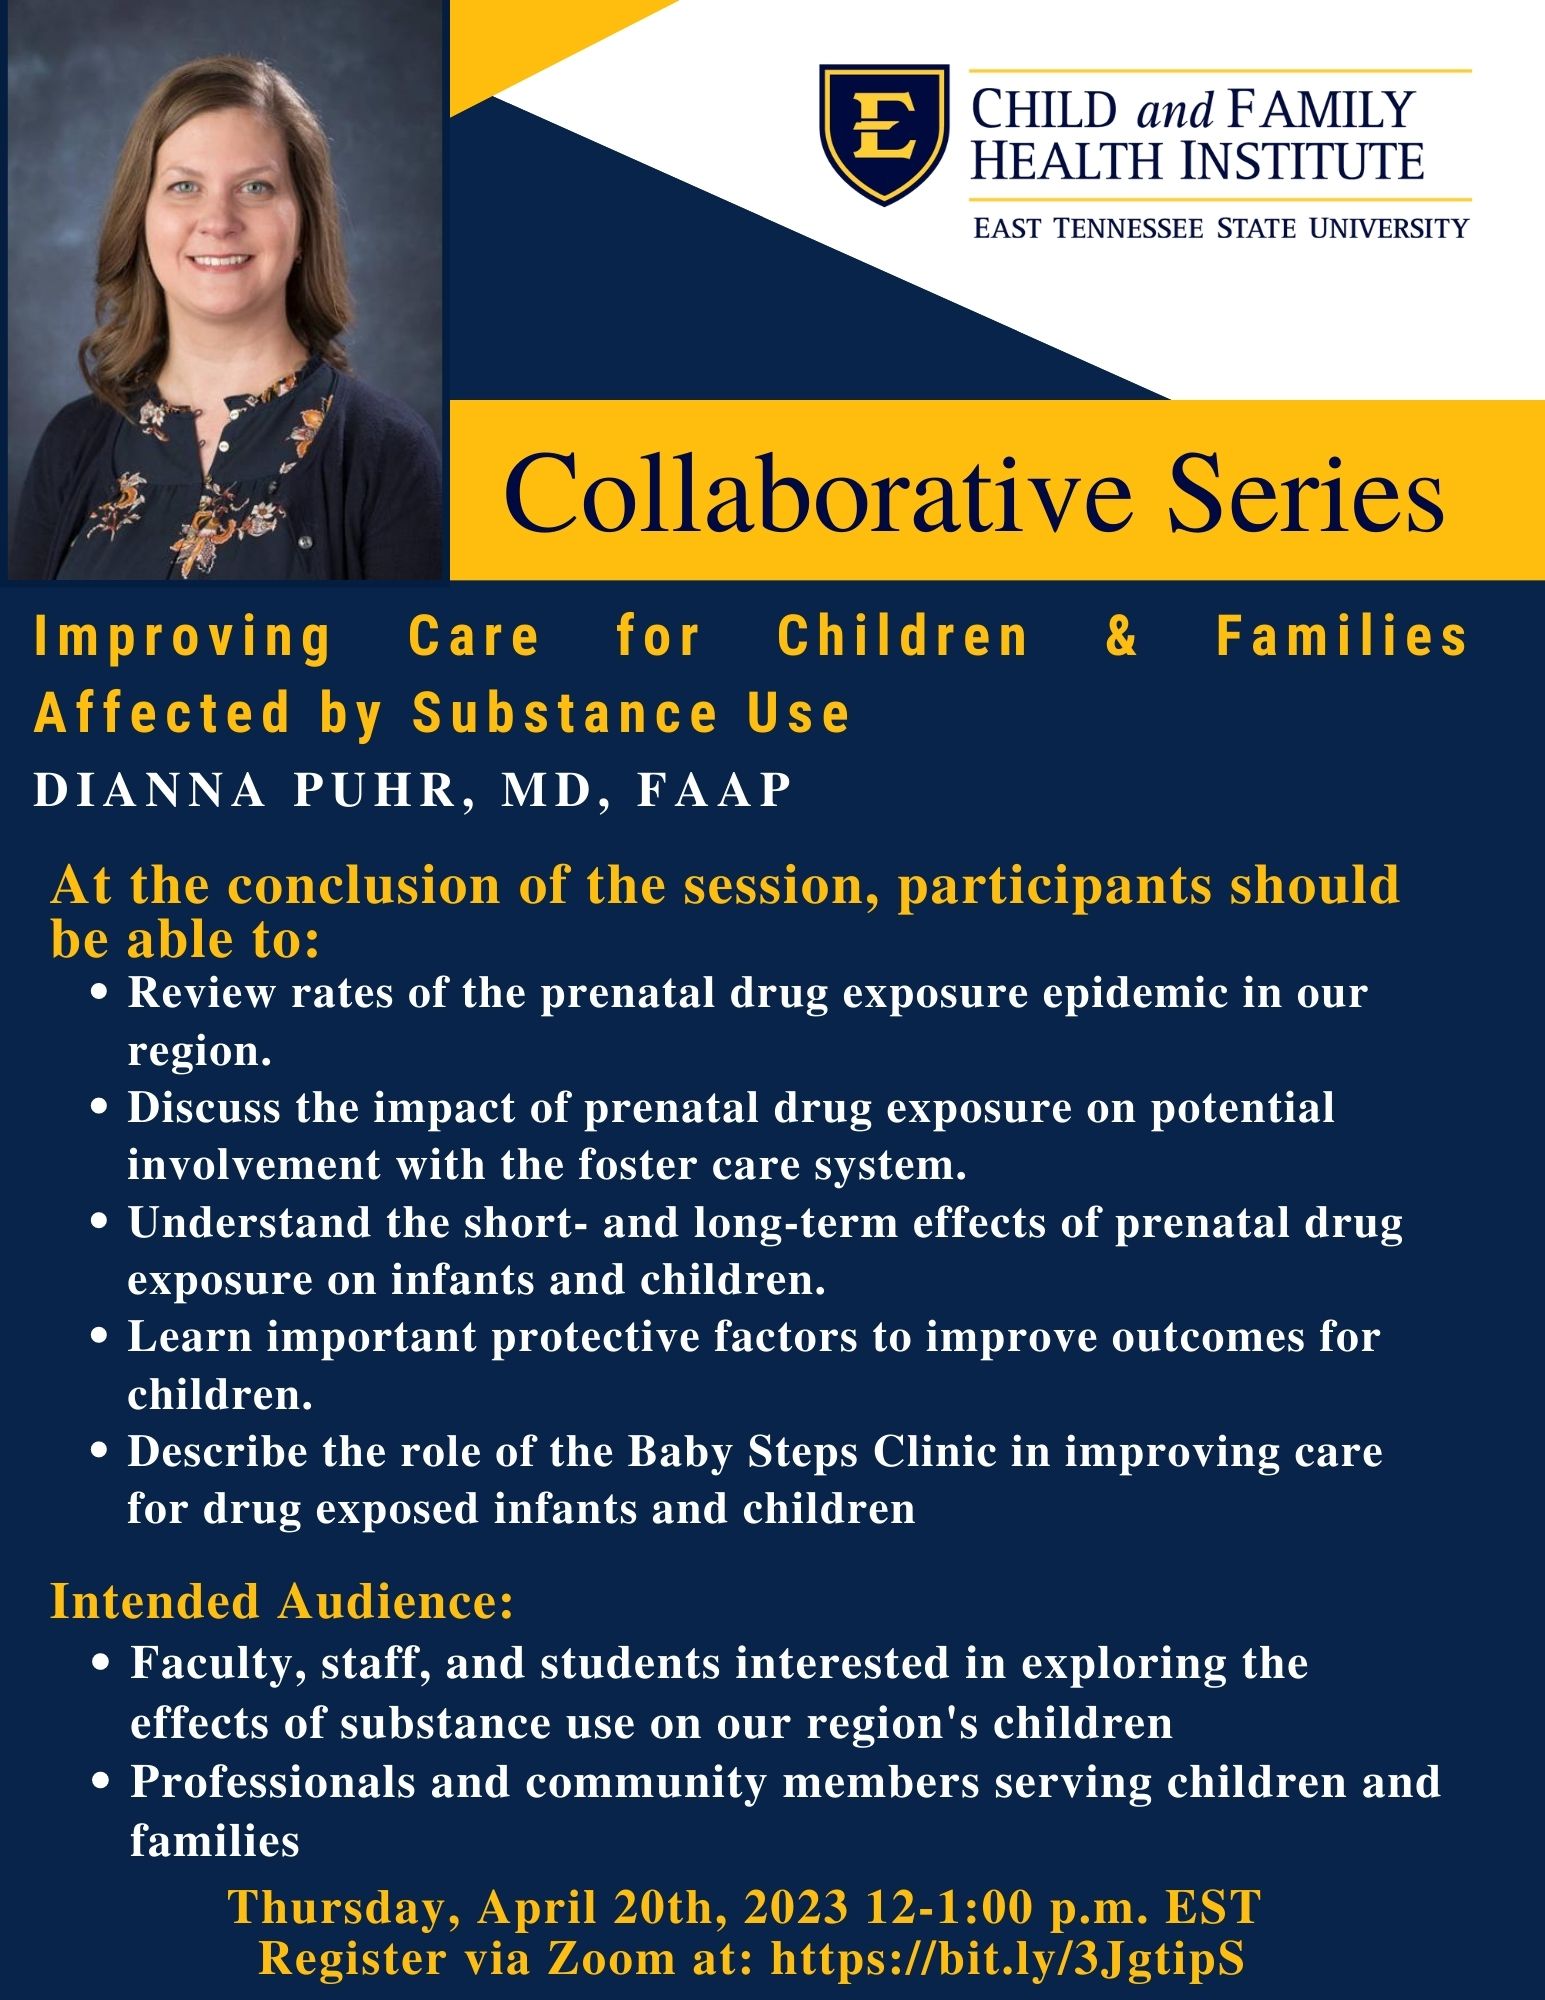 Child and Family Health Institute (CFHI) Collaborative Series - Improving Care for Children & Families affected by Substance Use - Dianna Puhr, MD Banner